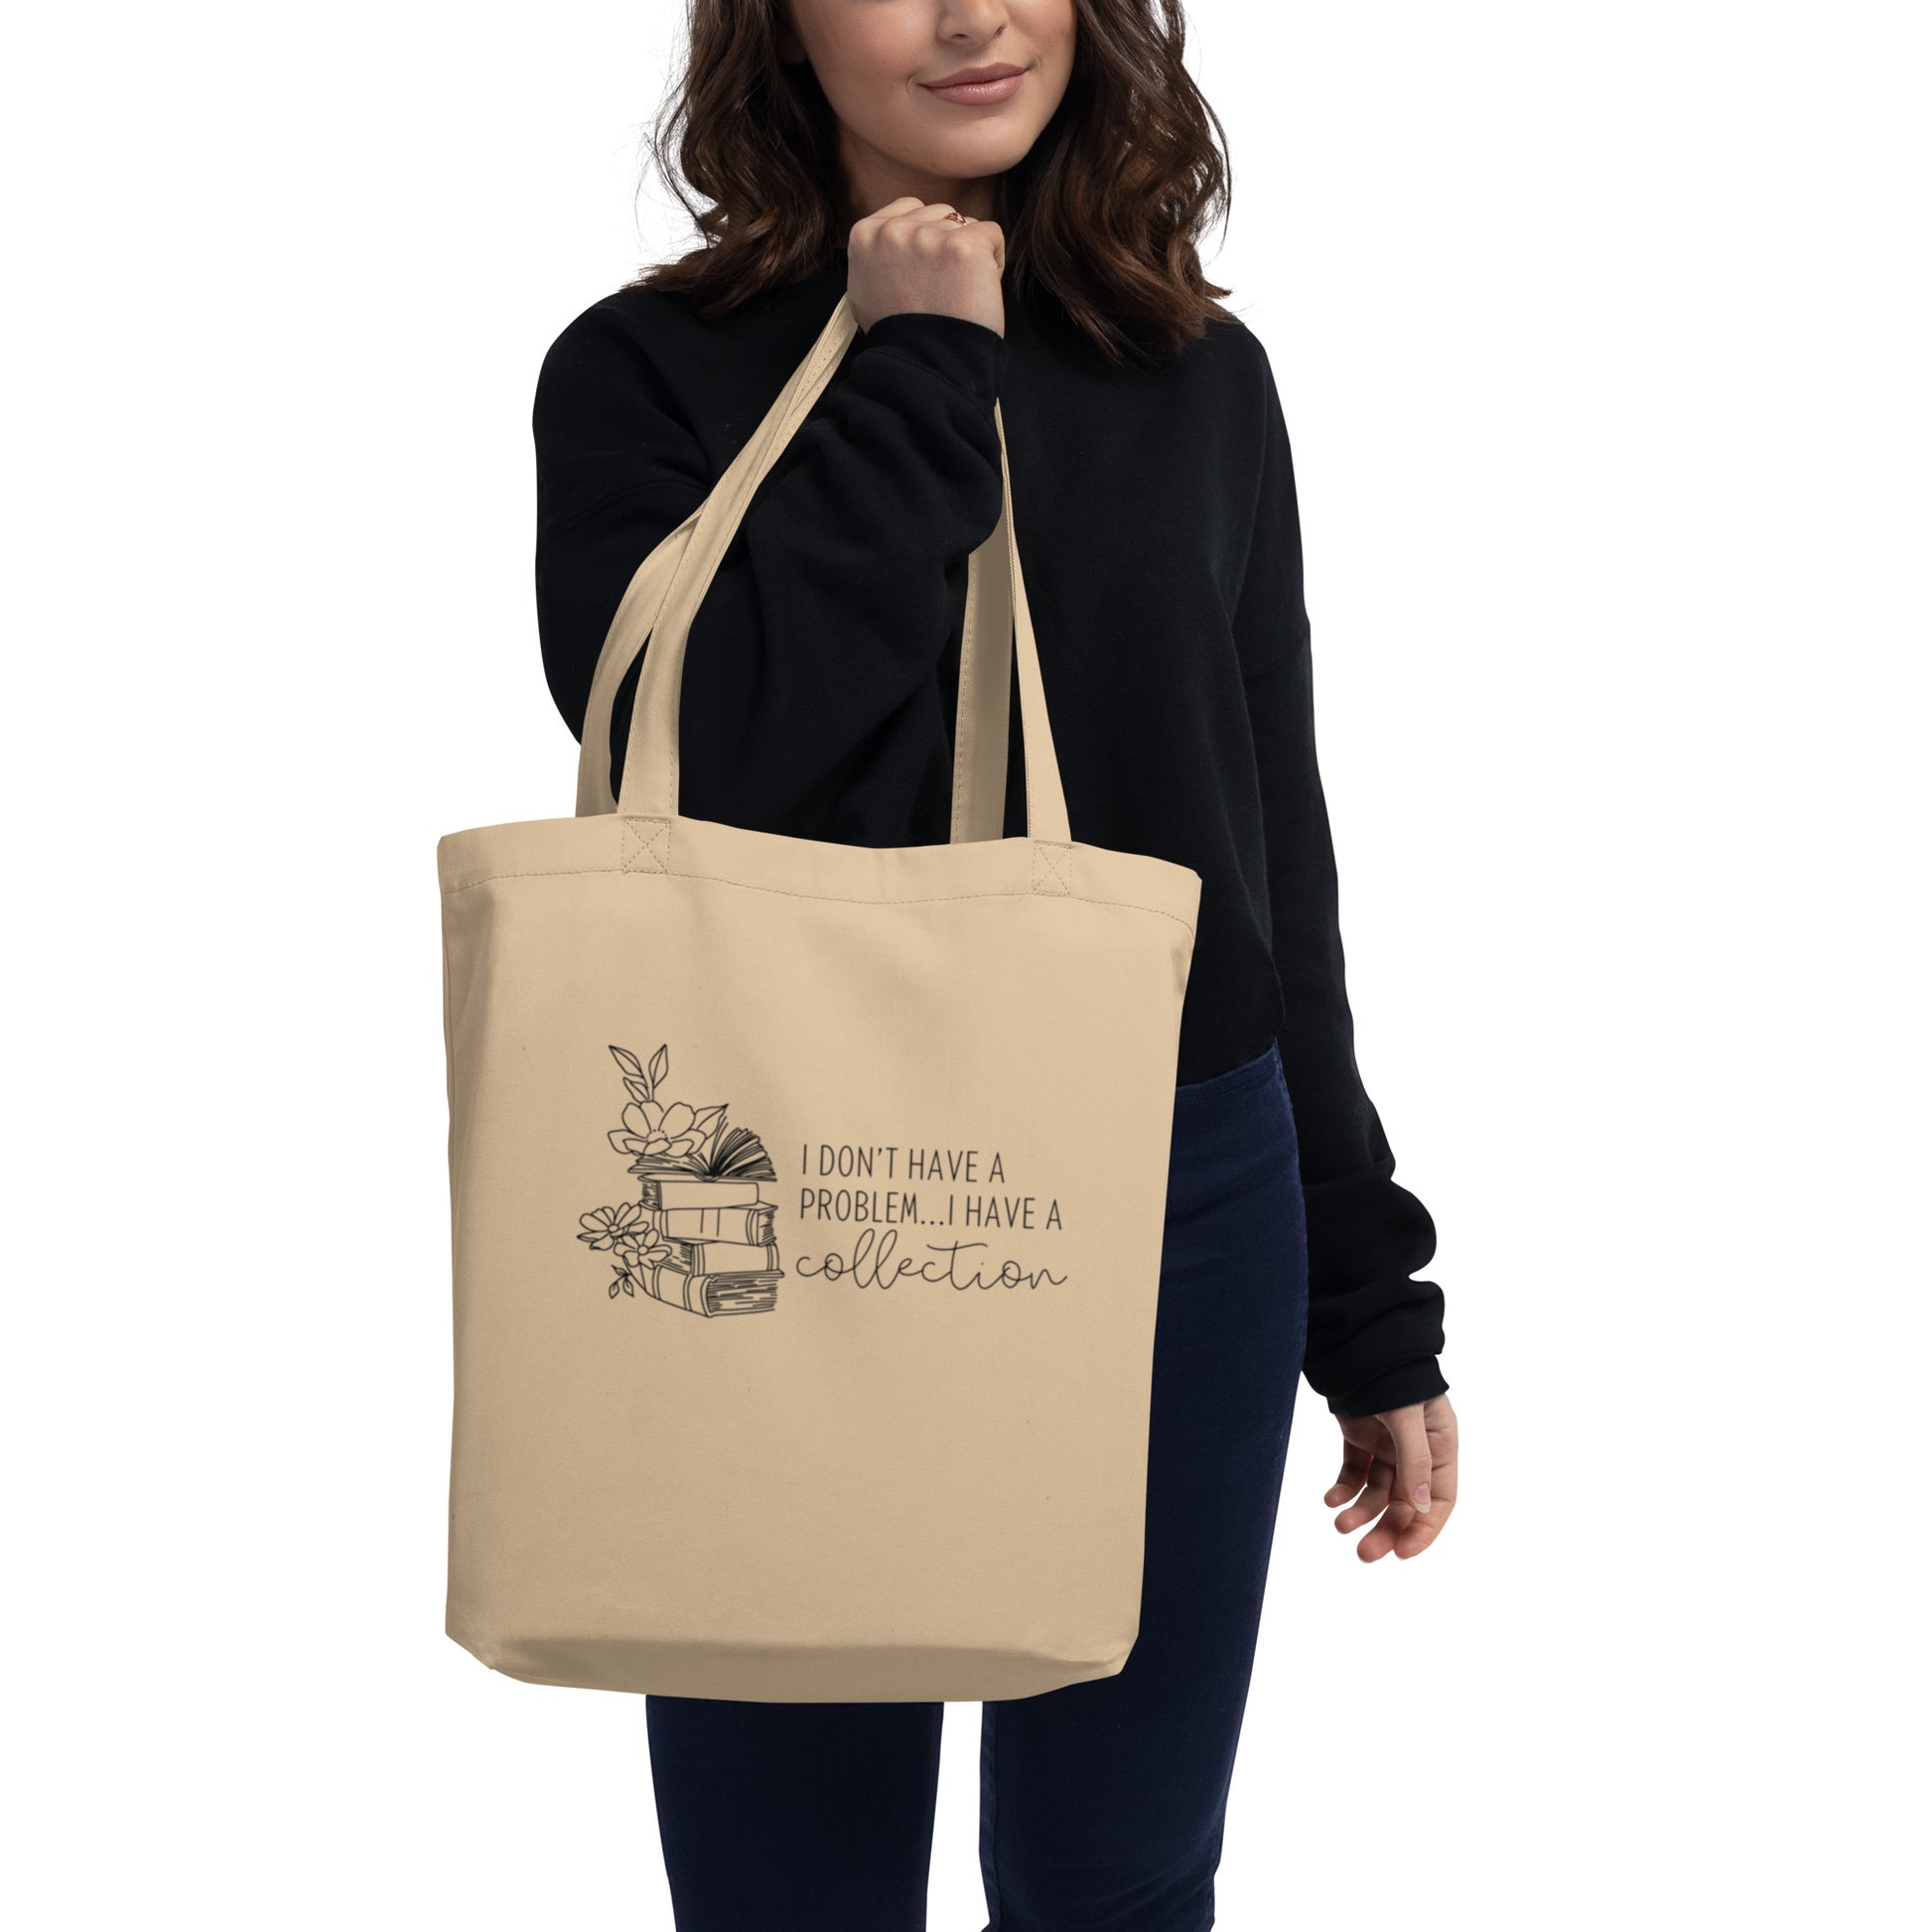 Woman holding tote bag that says Tan tote bag says I don't have a problem... I have a collection